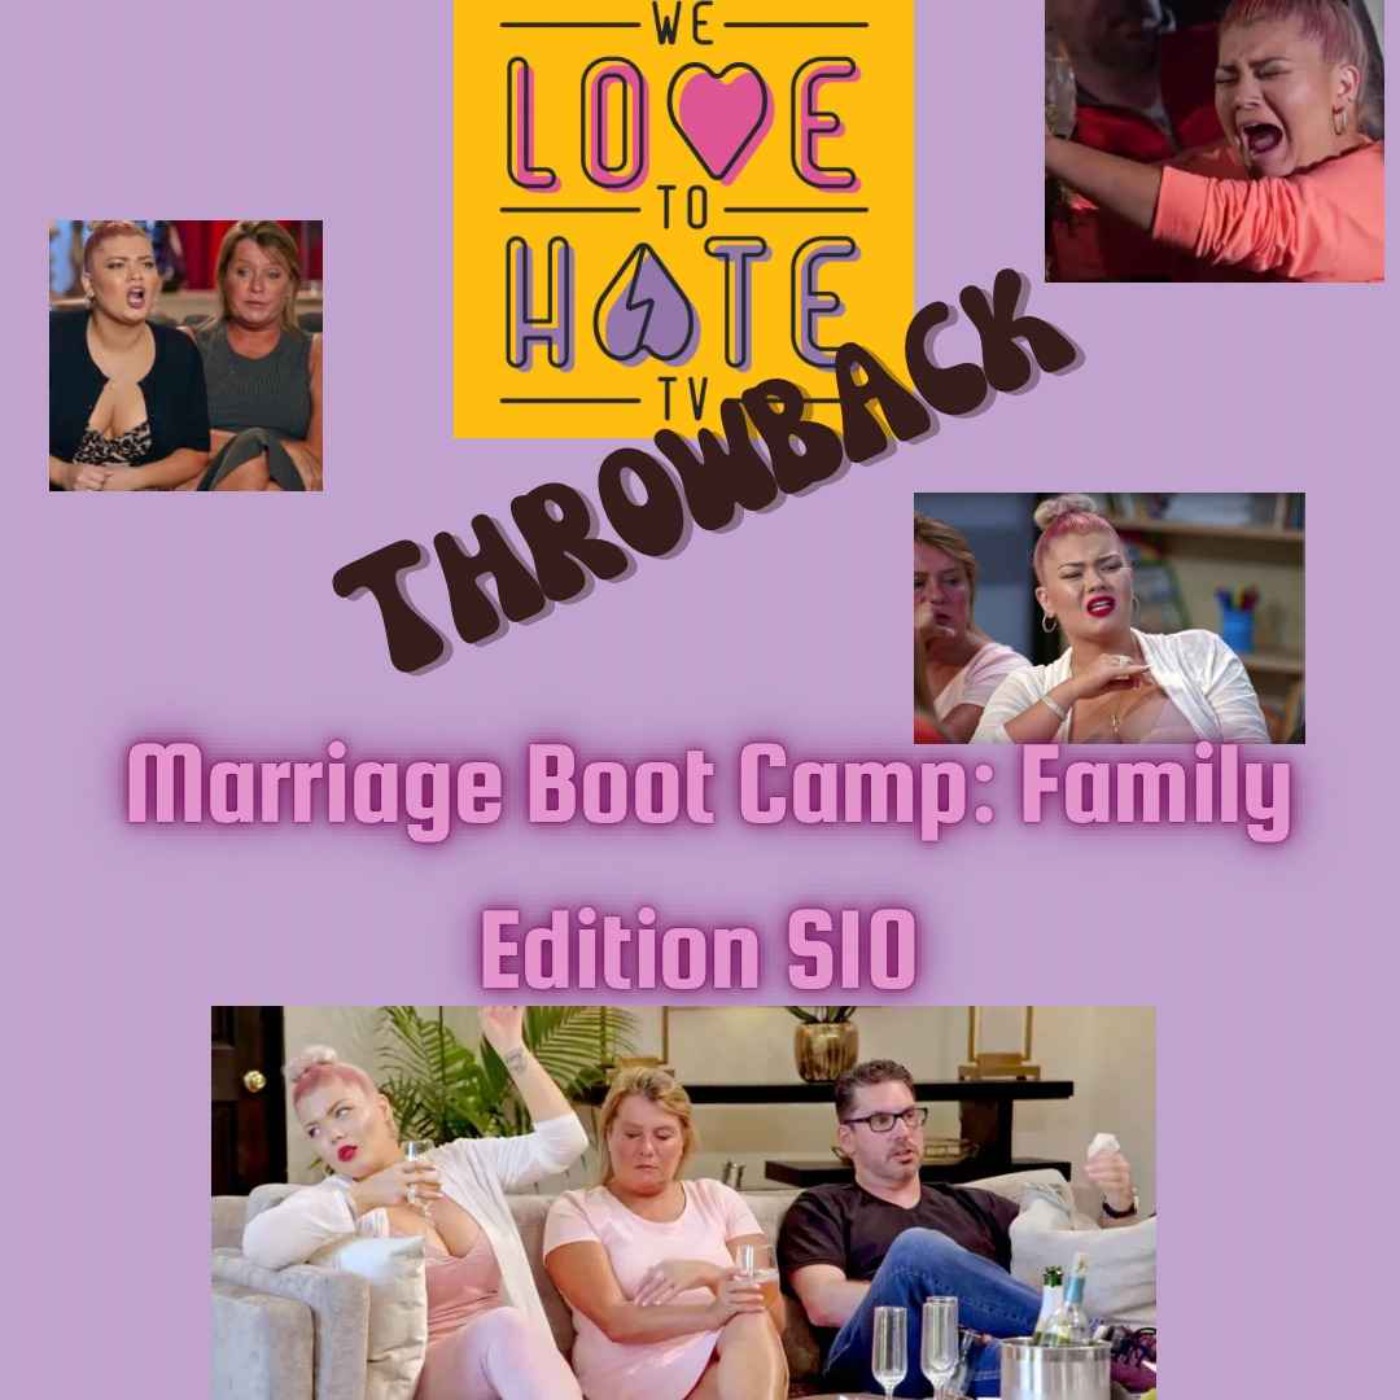 Marriage Boot Camp: Family Edition S10 E5 *THROWBACK* with special guest John Moum!